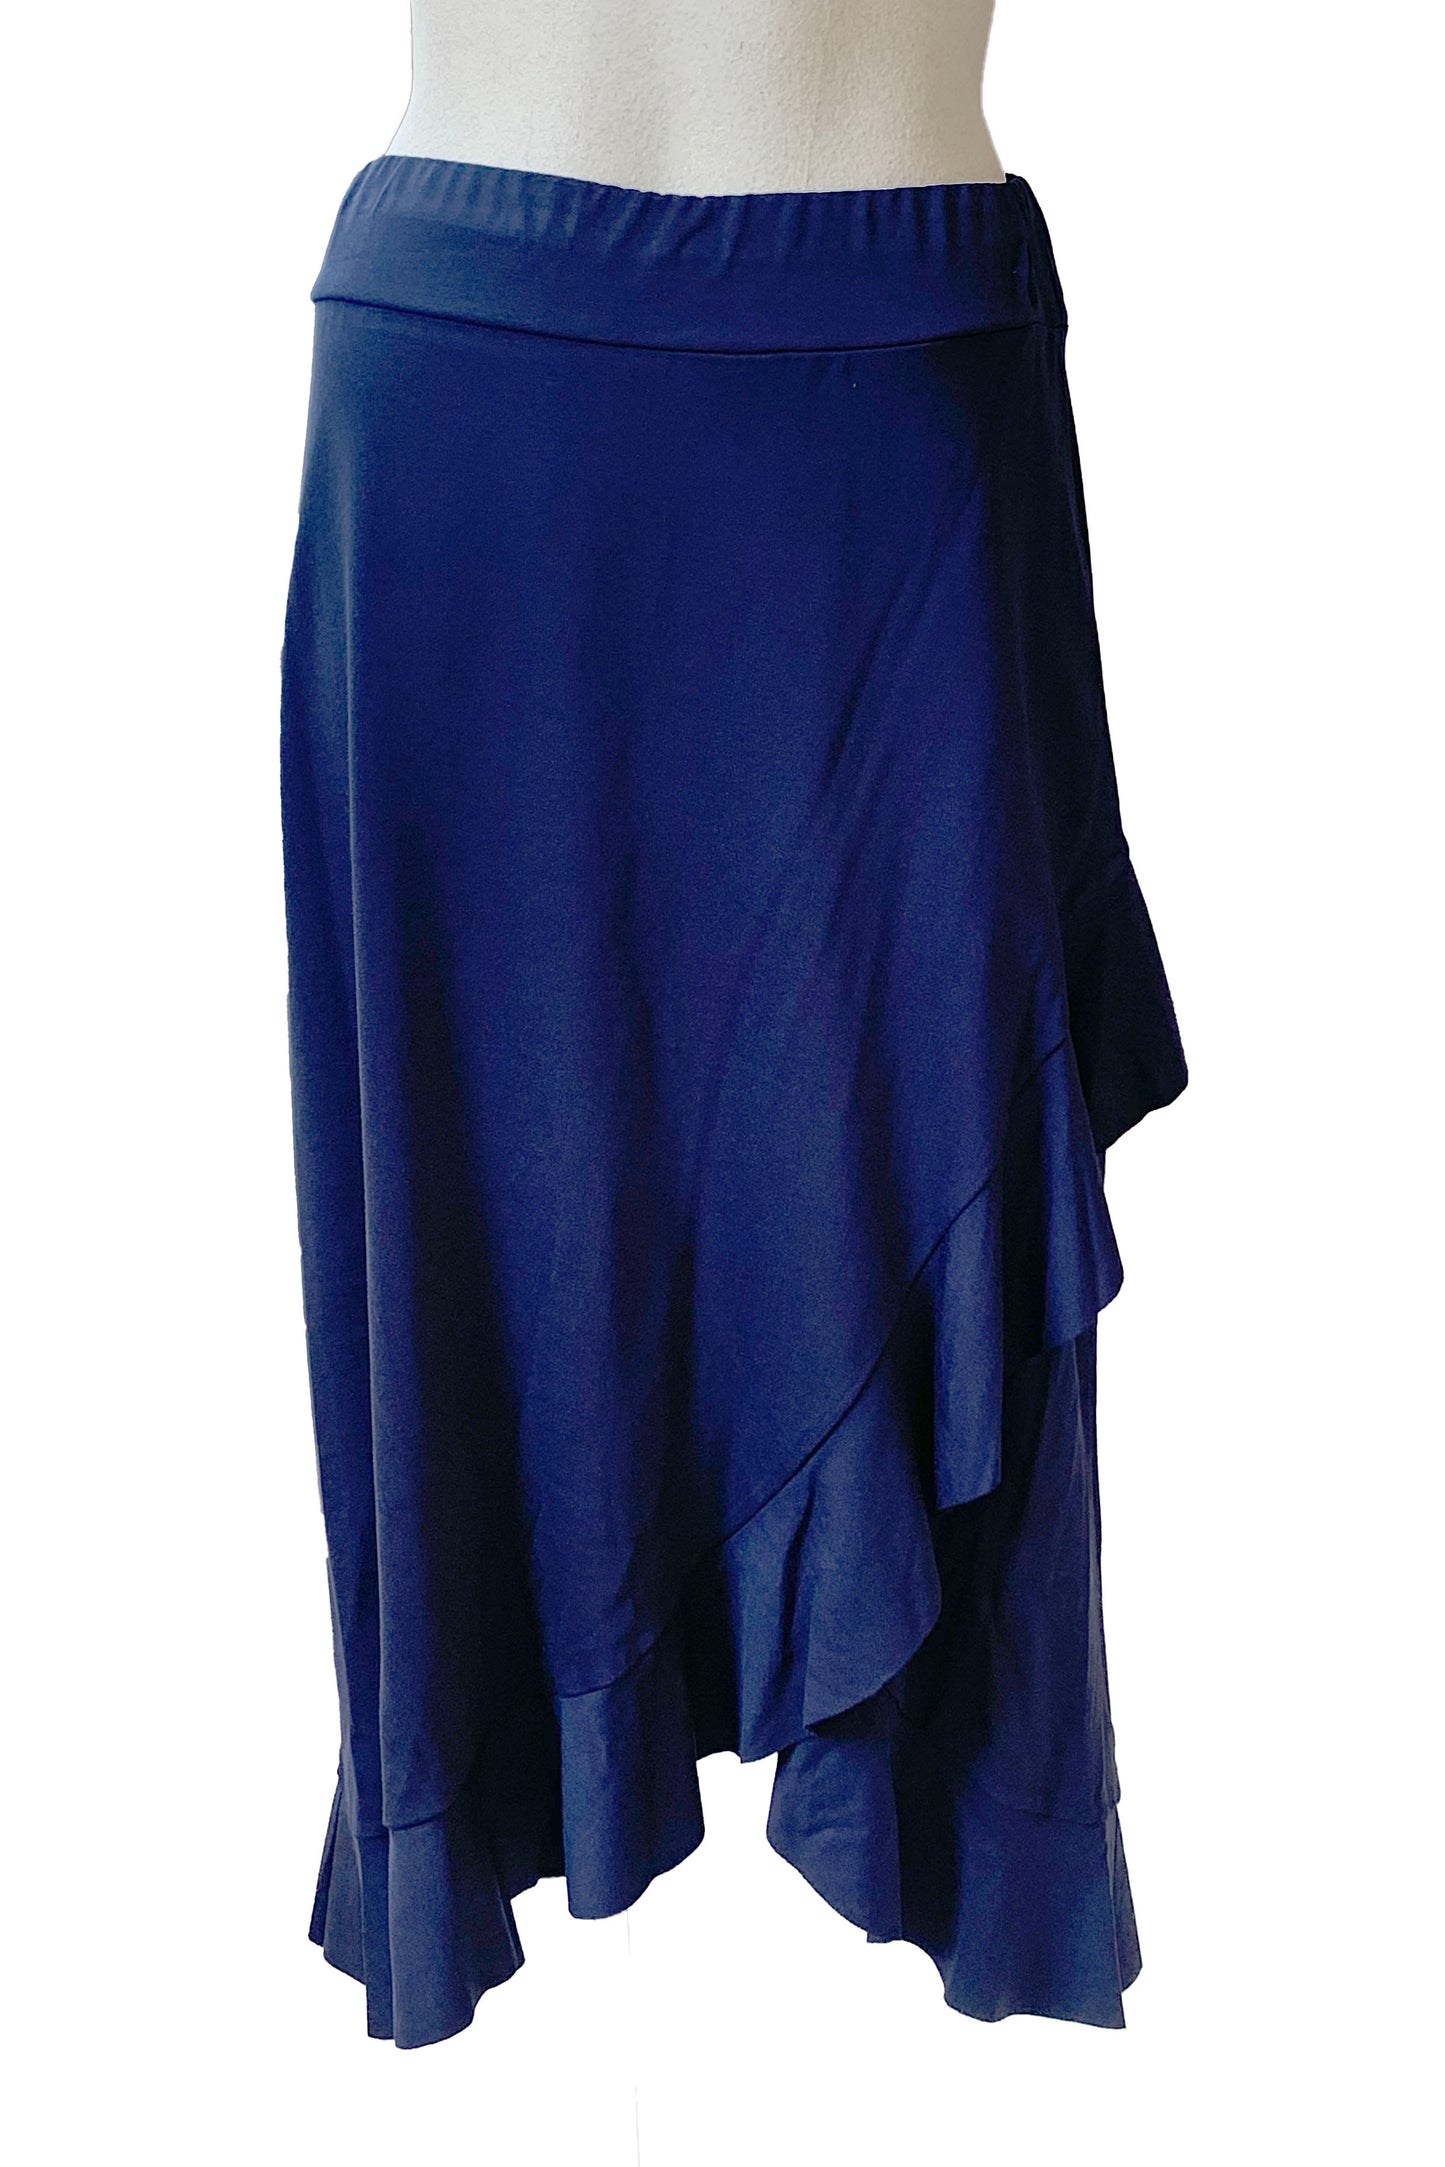 The Catrina Skirt by Pure Essence in Navy is shown on a mannequin against a white background